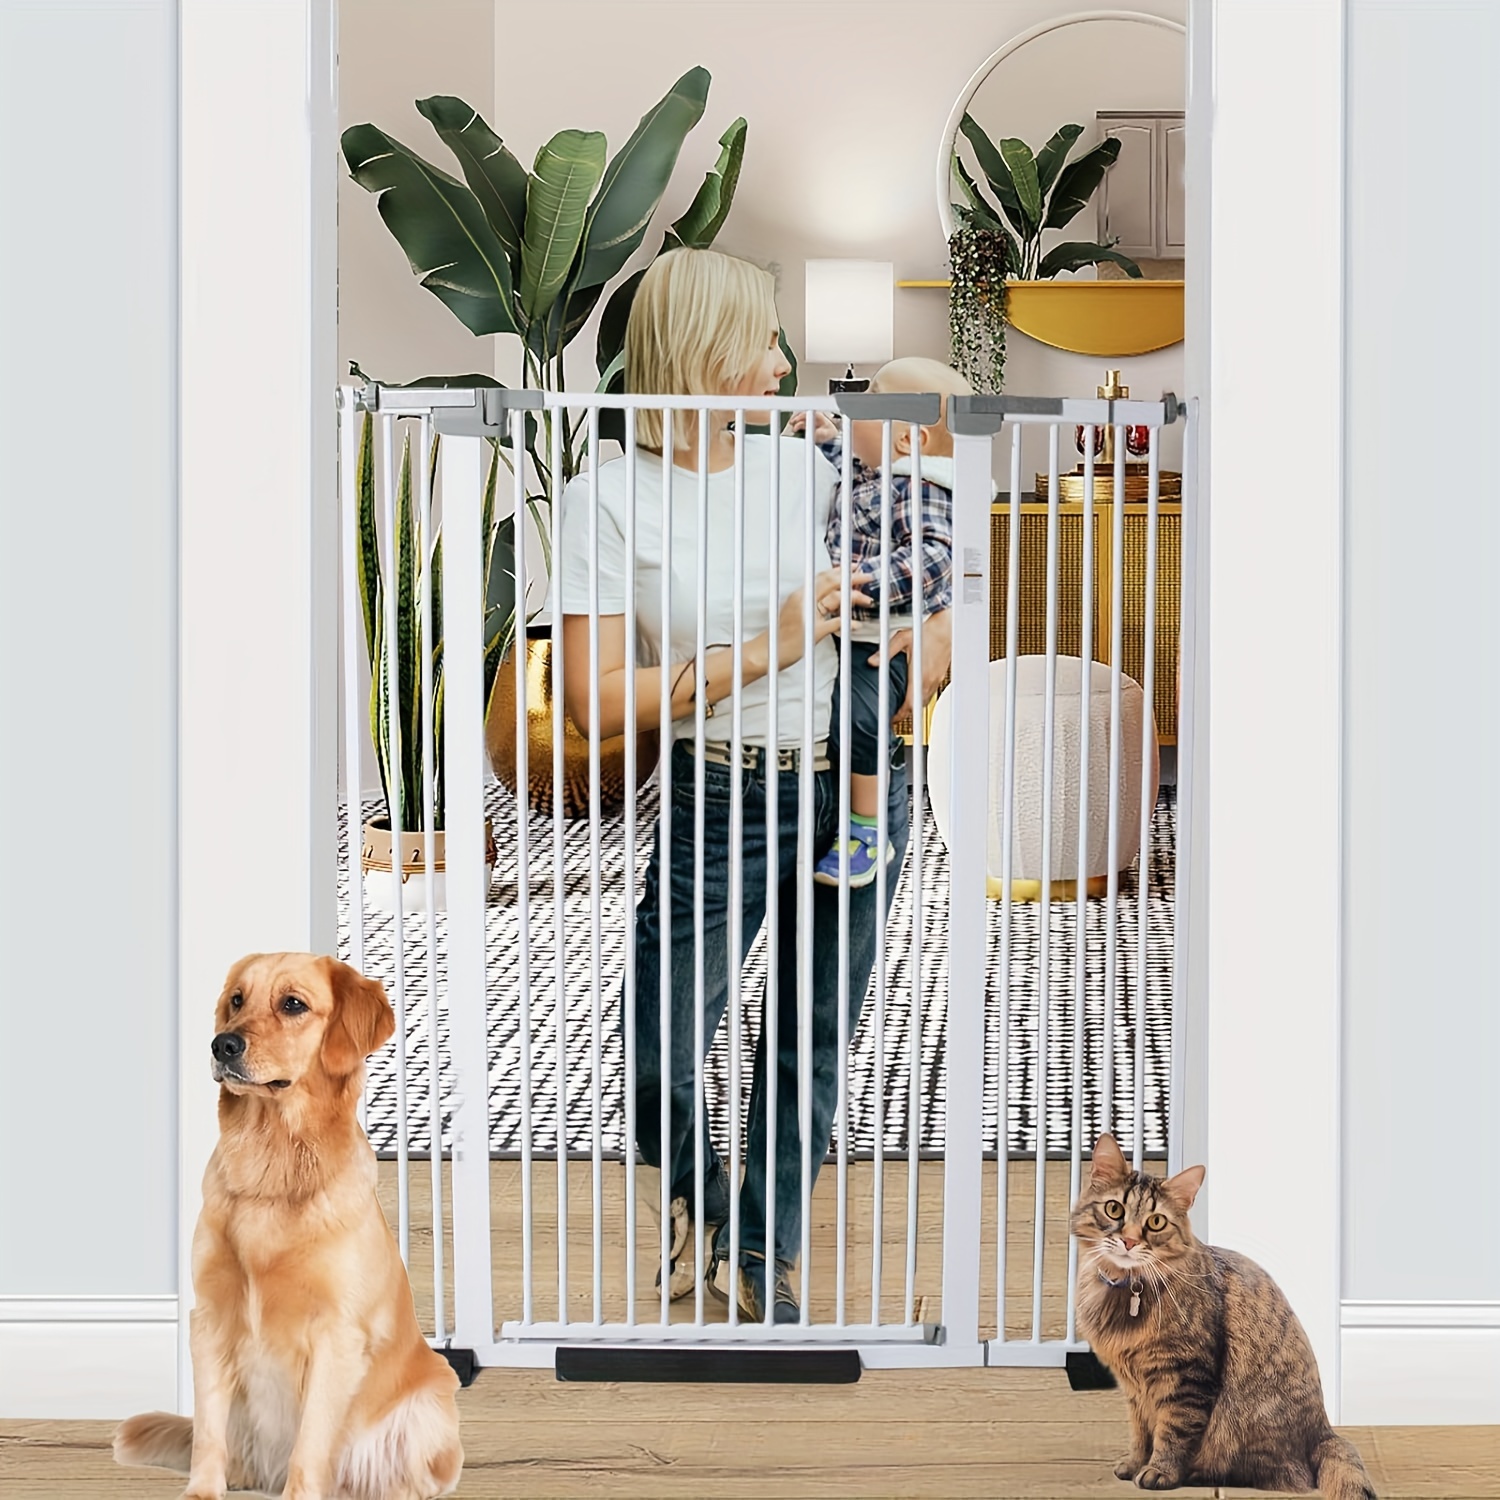 

51 Inch Extra Tall Cat Pet Gate For Doorway, 30.31"-44.07" Auto Close Pet Gate, Safety Pet Gates Child Gate For Stairs, Doorway, House